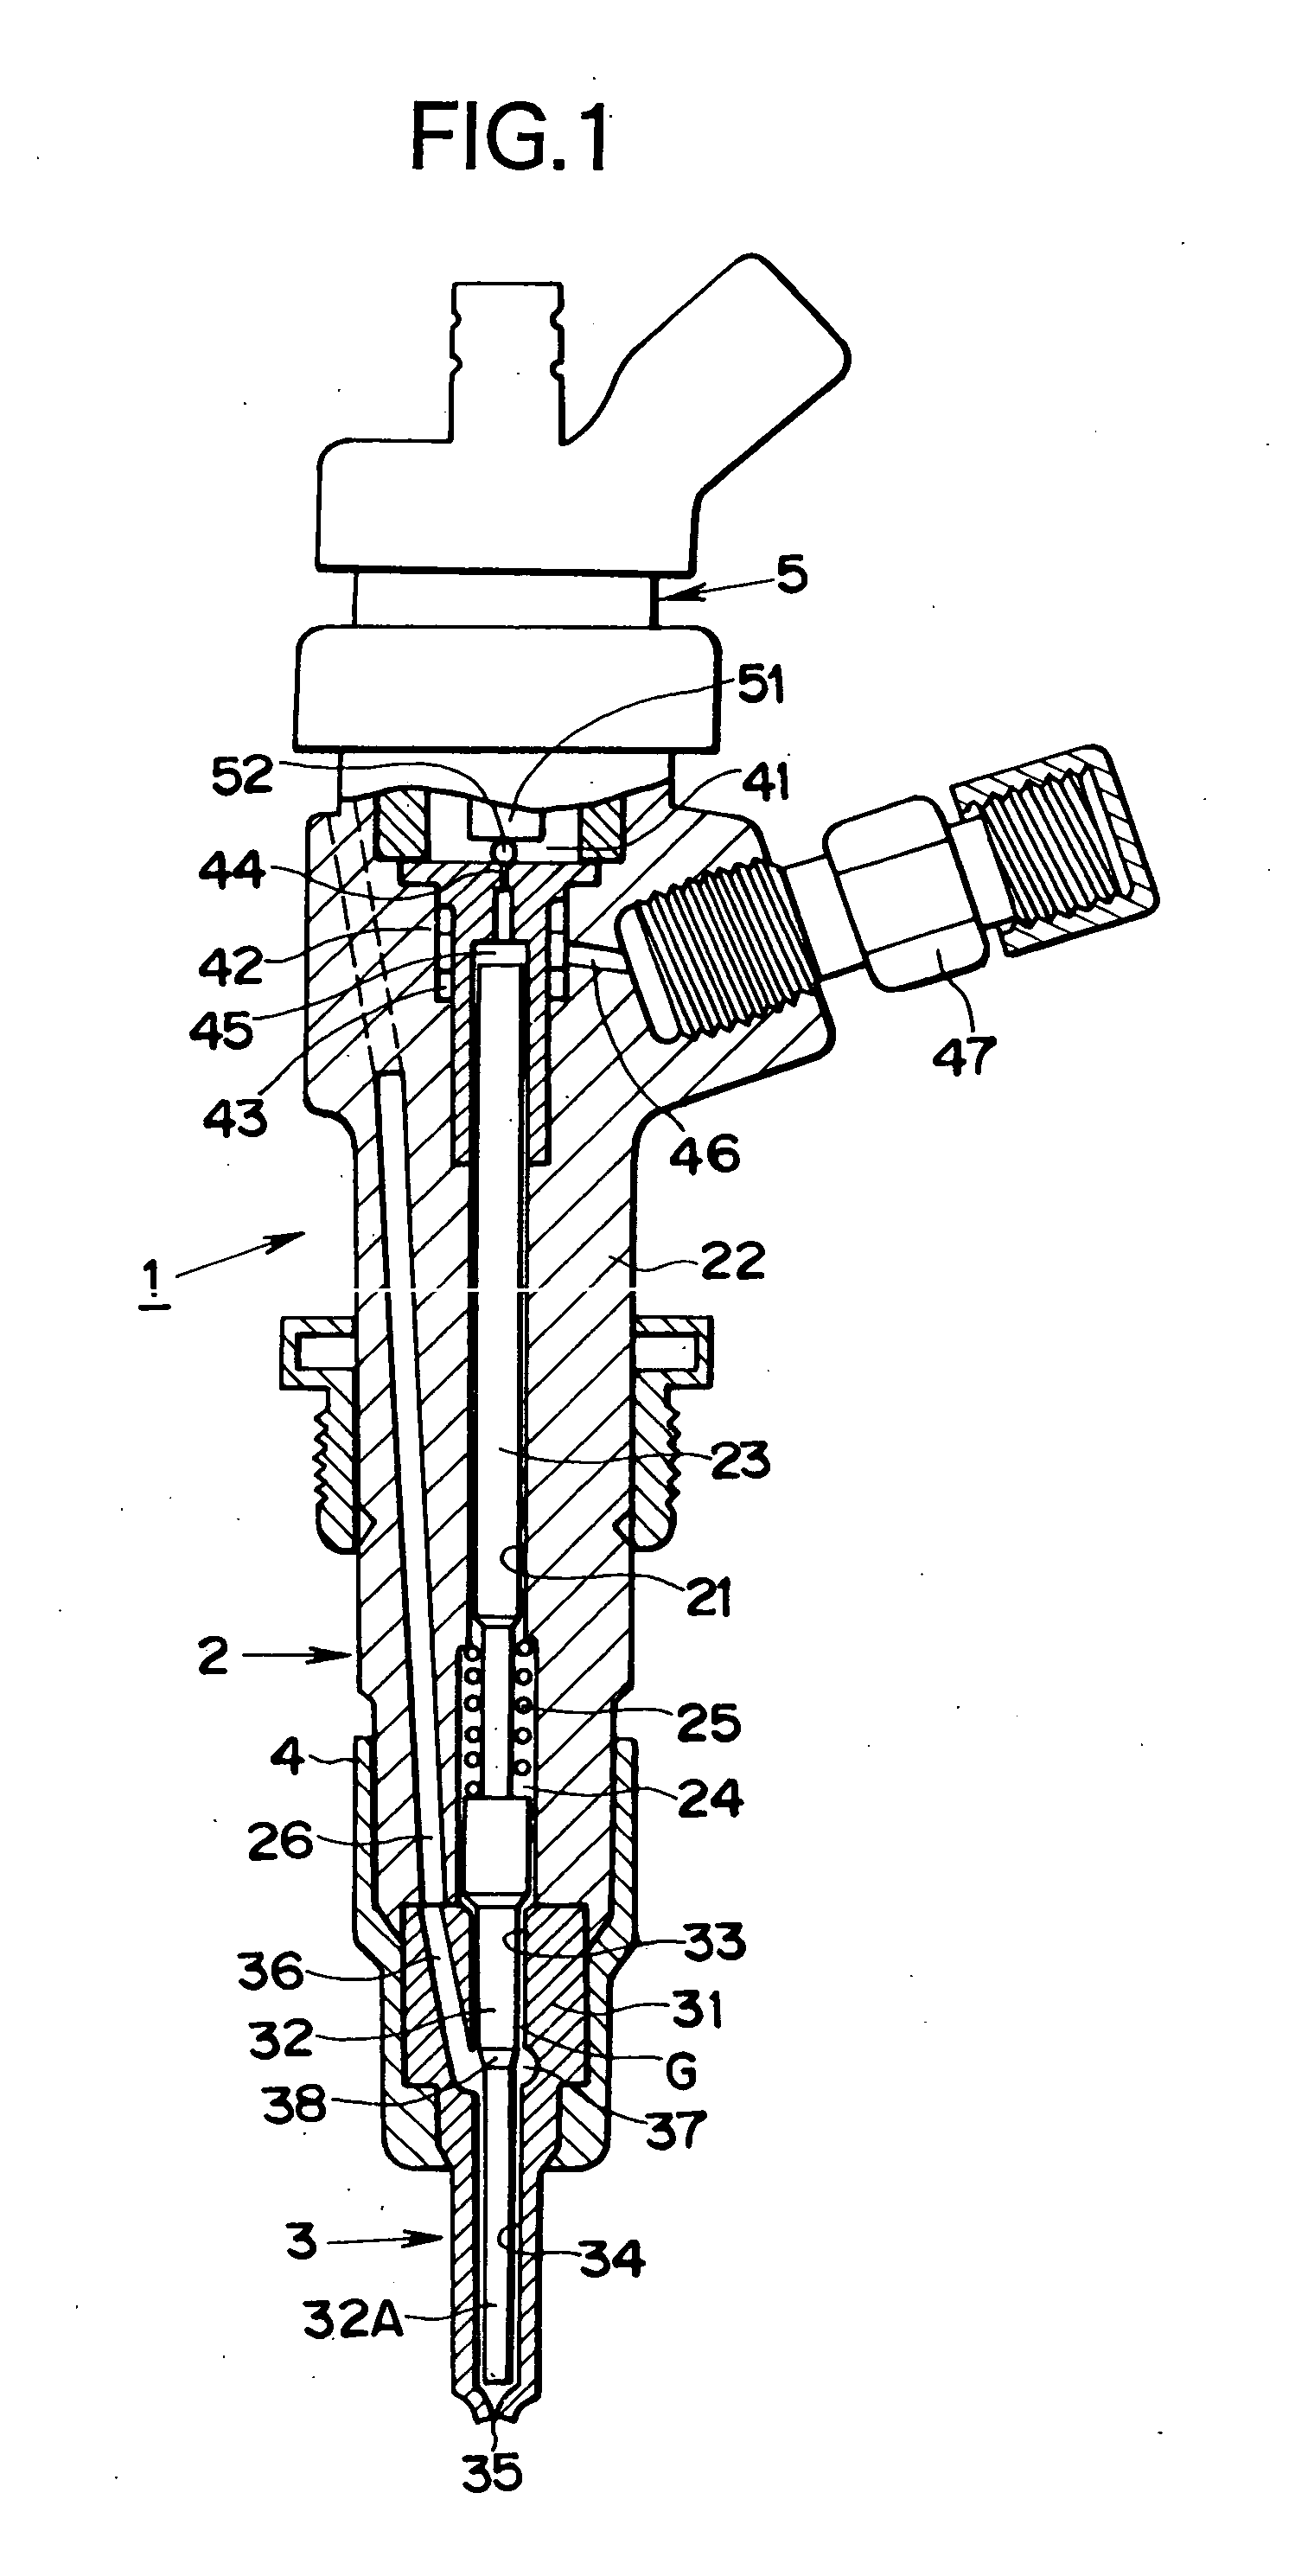 Fuel Injection Valve For Internal Combustion Engine